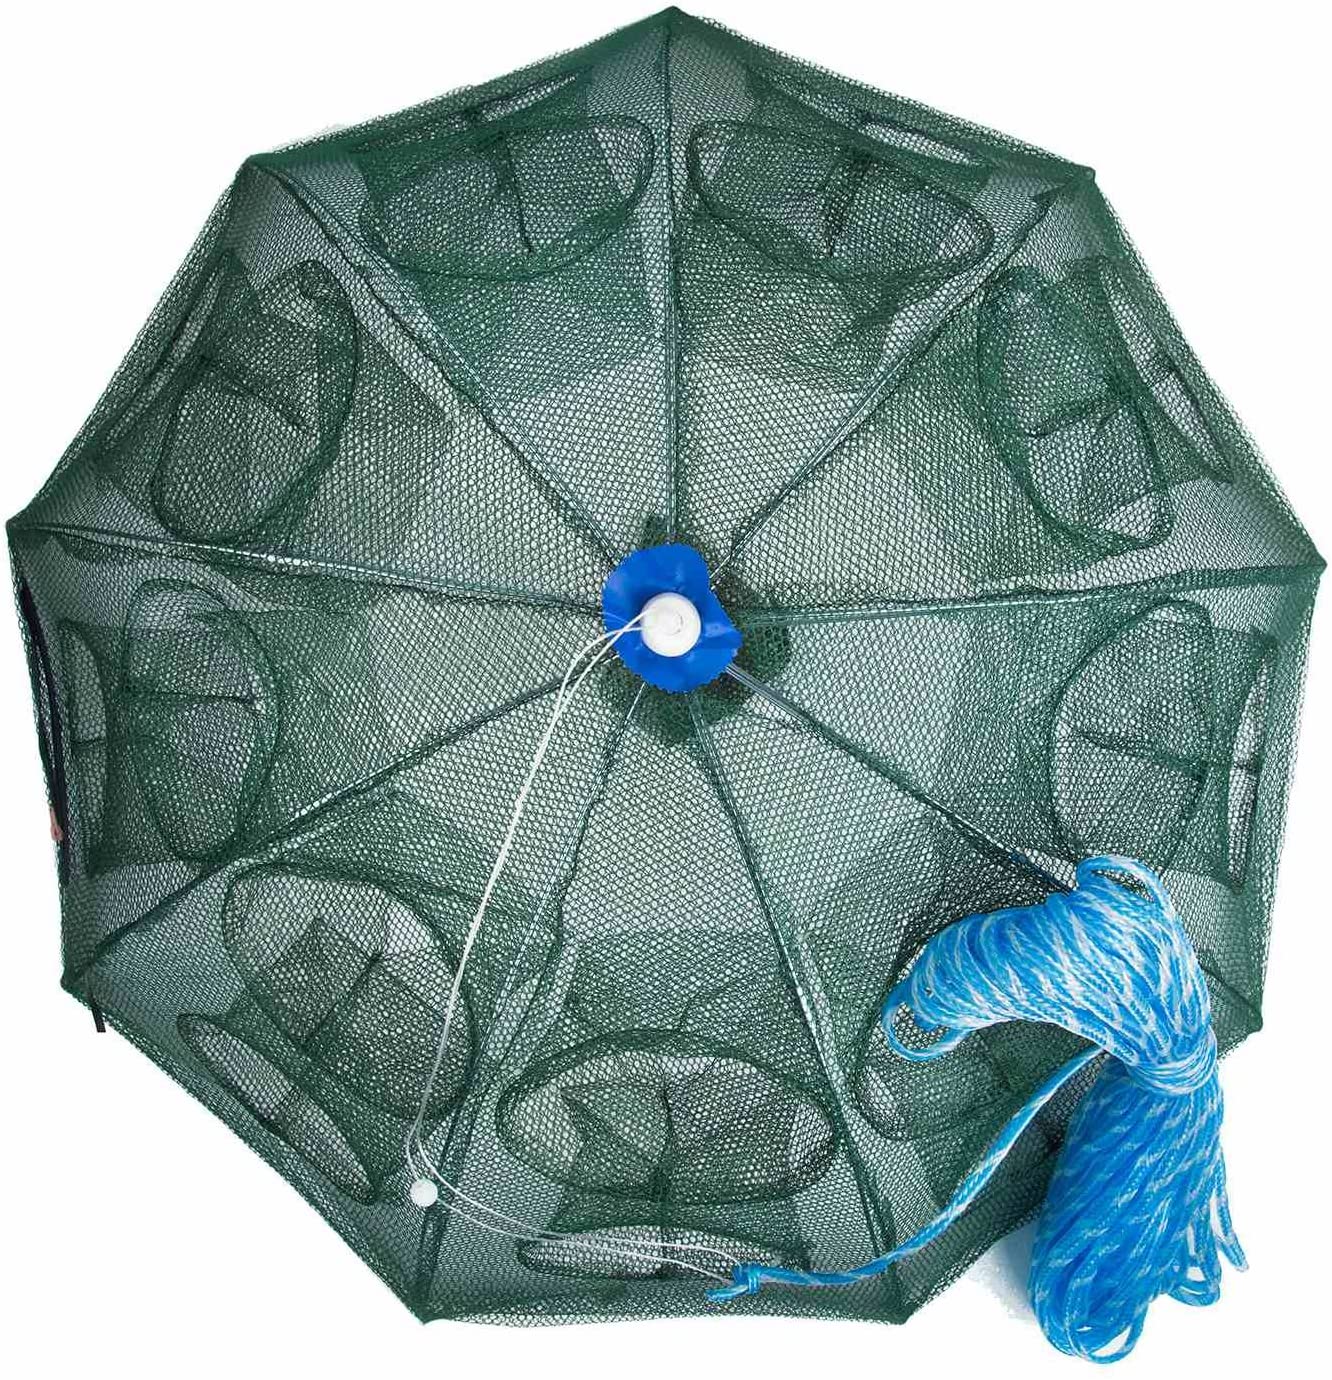 Portable Fishing Net Lobster Cage Foldable Crab Fish Catcher Trap